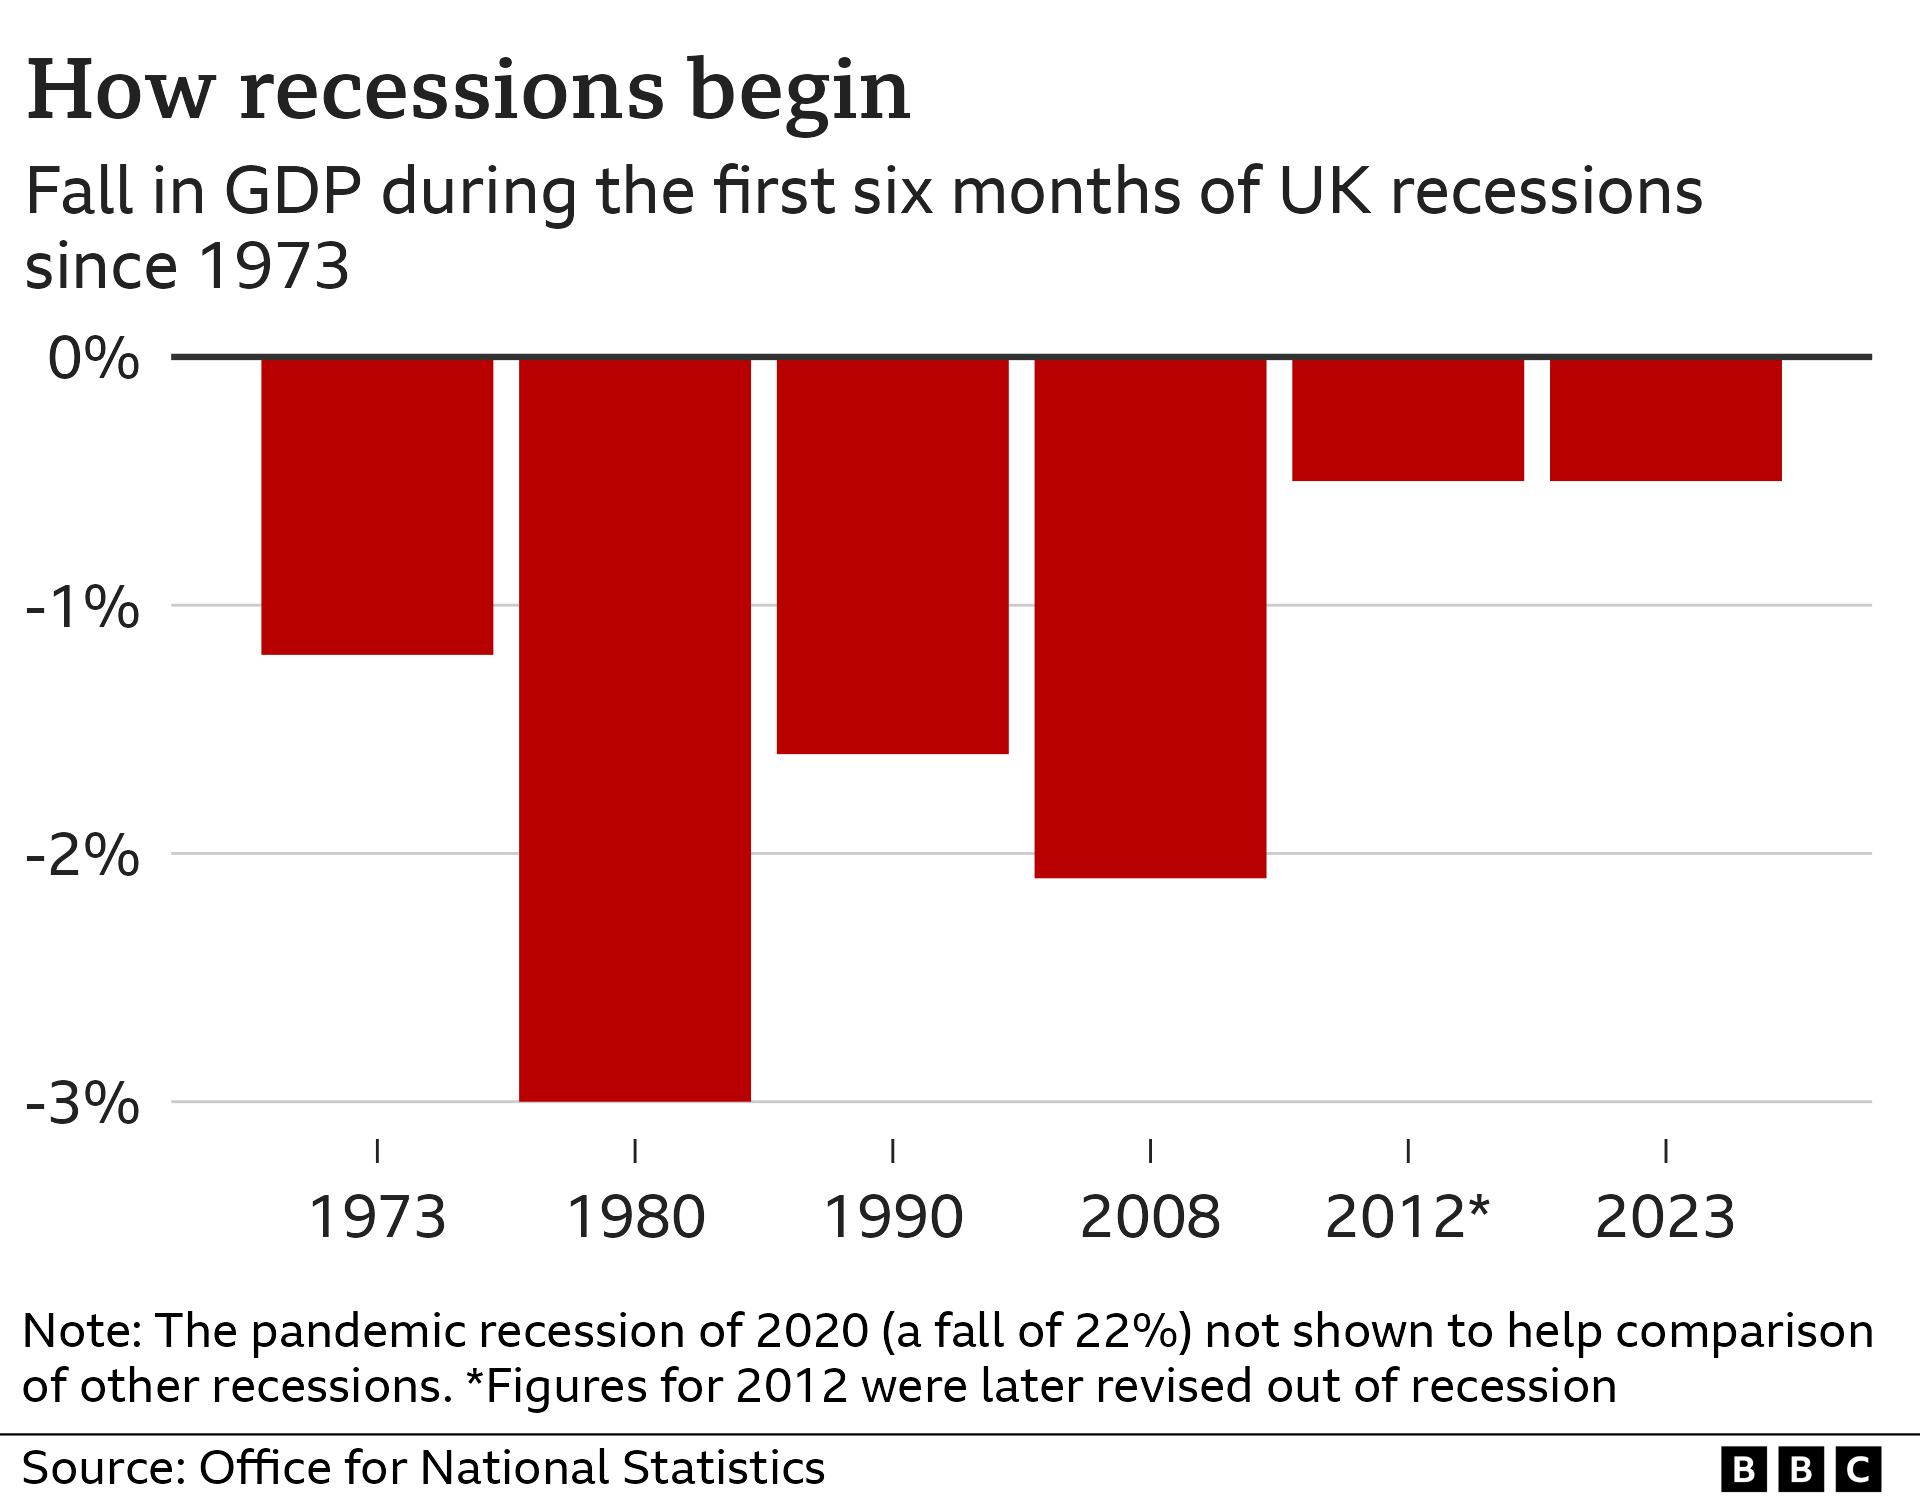 Drop in GDP at the start of recent recessions suggests the biggest drop in 1980, followed by 2008, with the 2023 being the shallowest at -0.5%